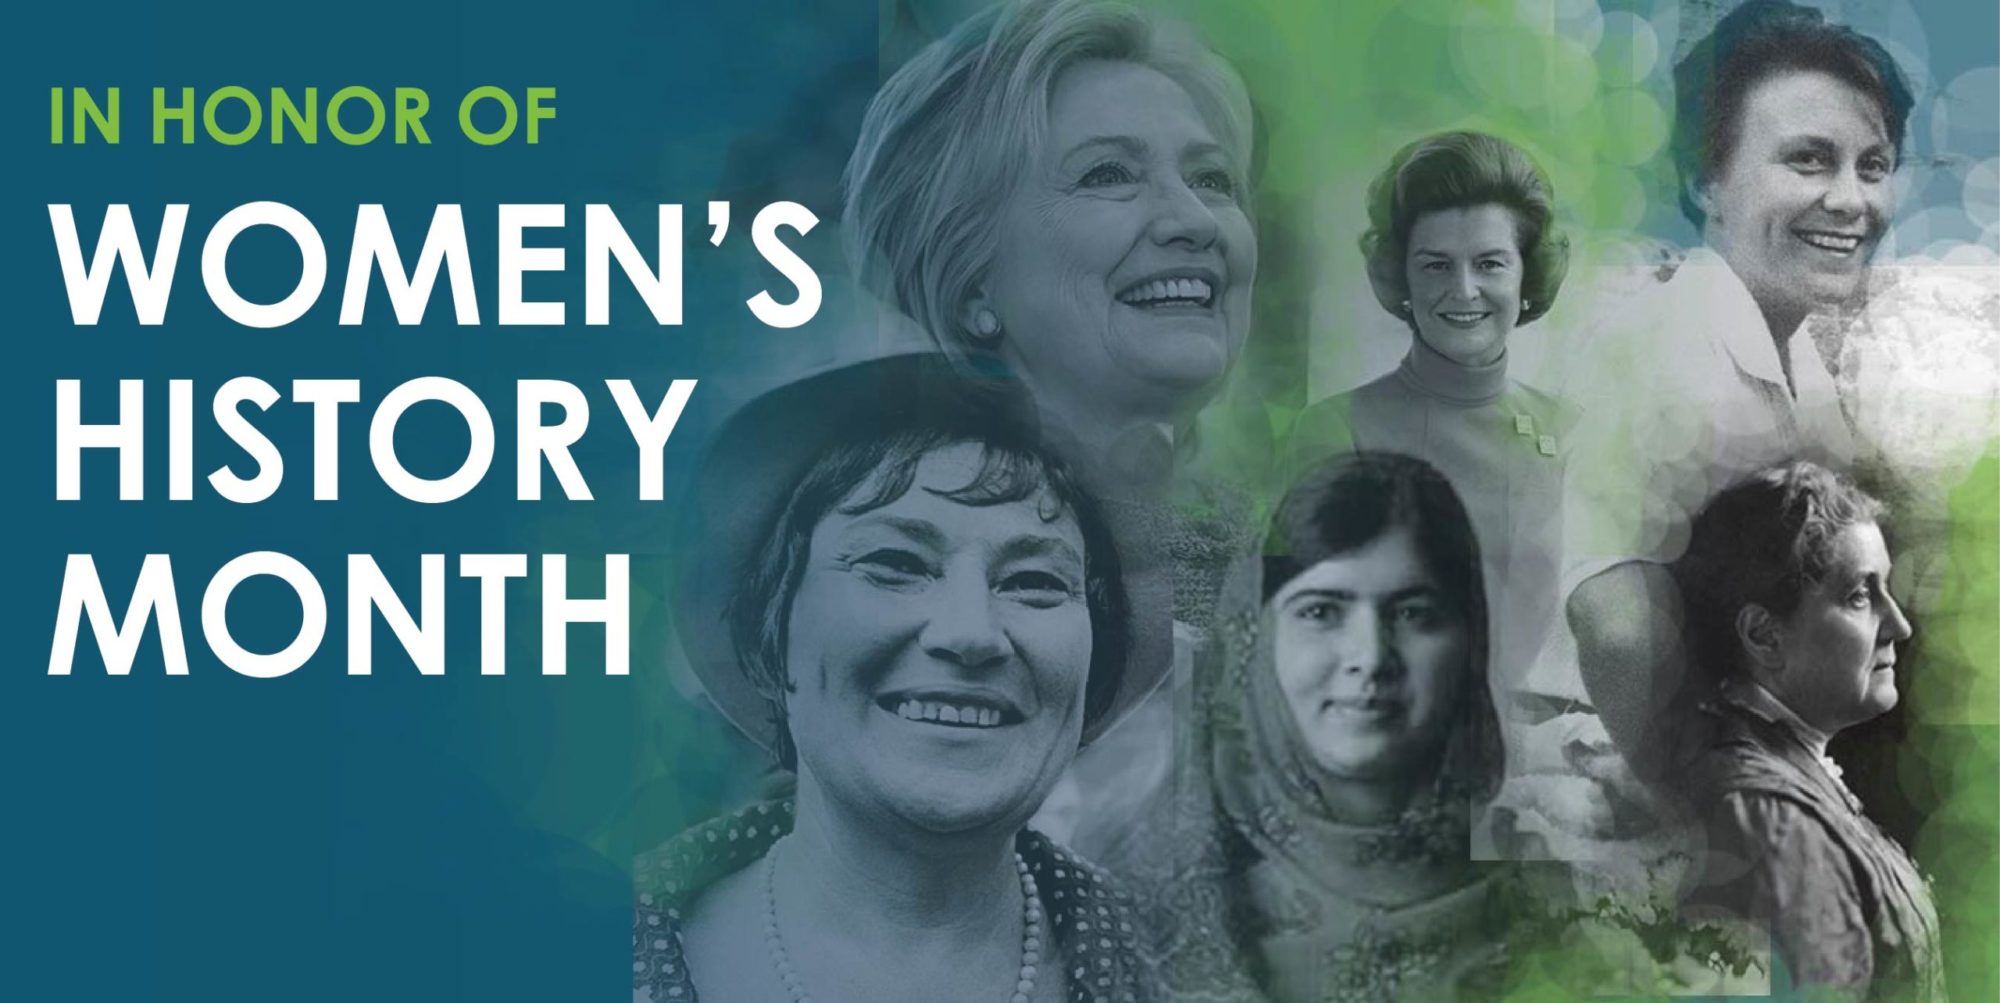 A blue and green image displays multiple important women of history and the text, "In Honor of Women's History Month"